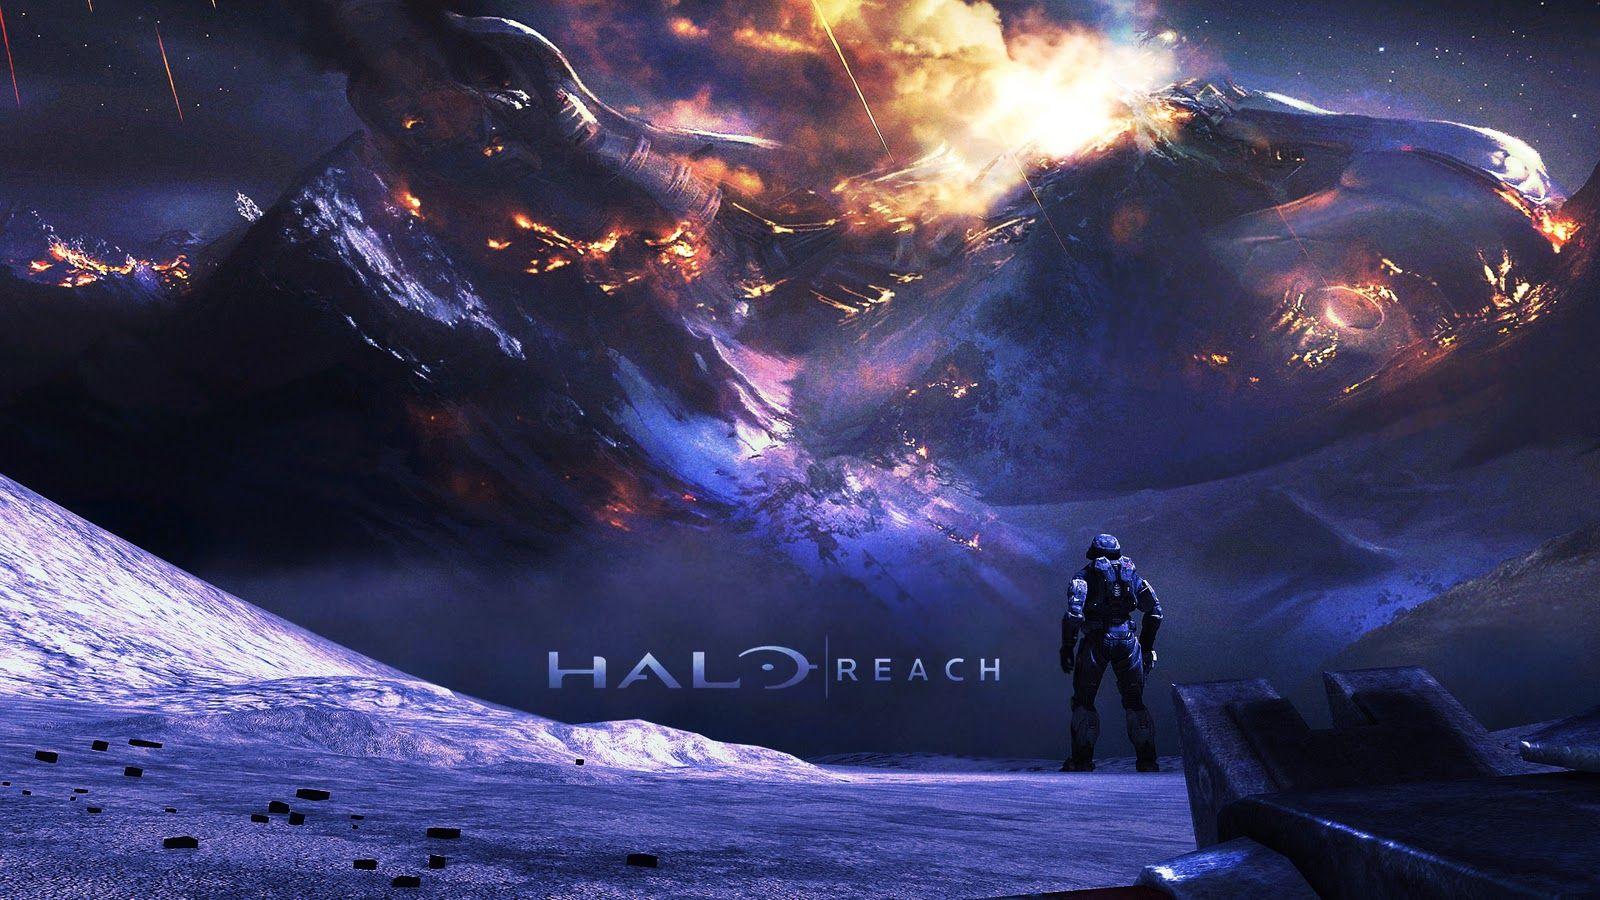 Halo Reach PC Gameplay Surfaces Online From The Game's Single Player Campaign